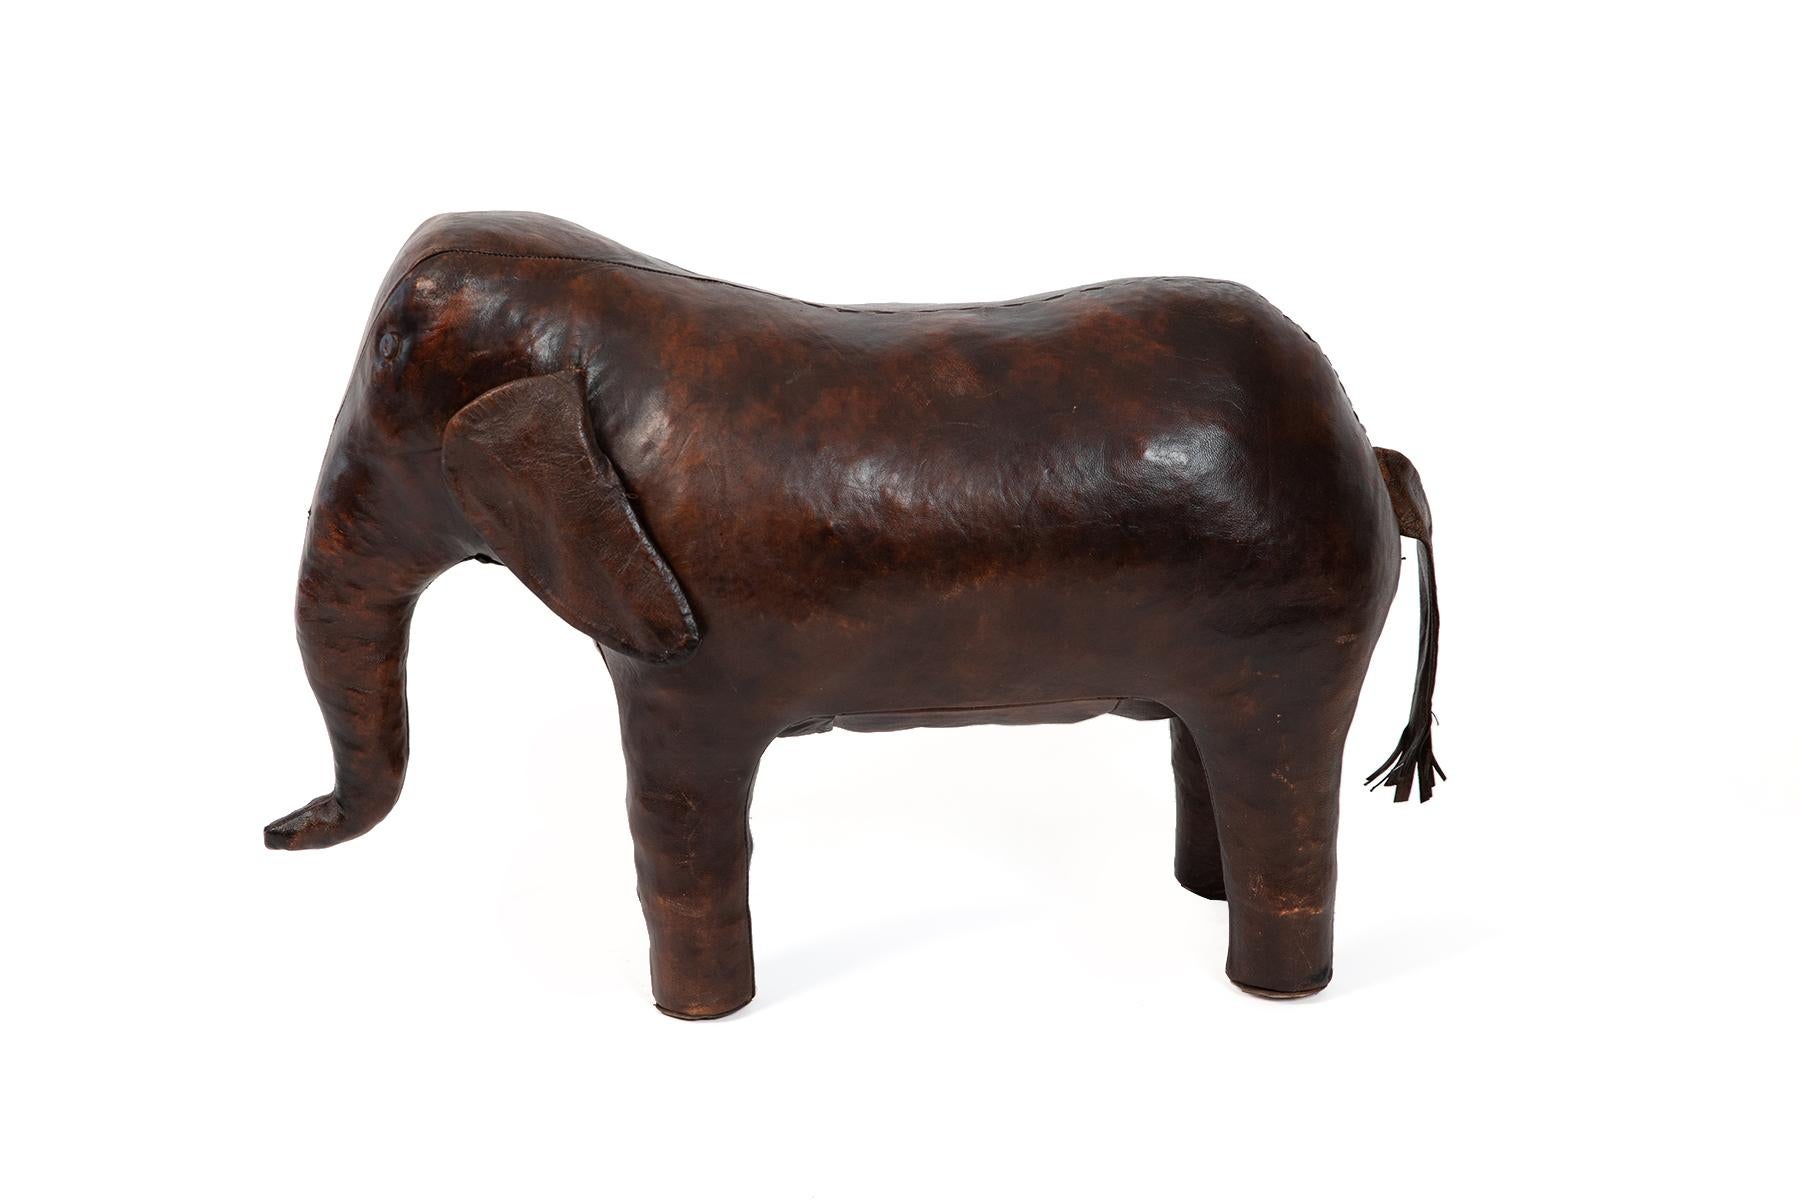 North American Omersa Leather Elephant Ottoman or Sculpture